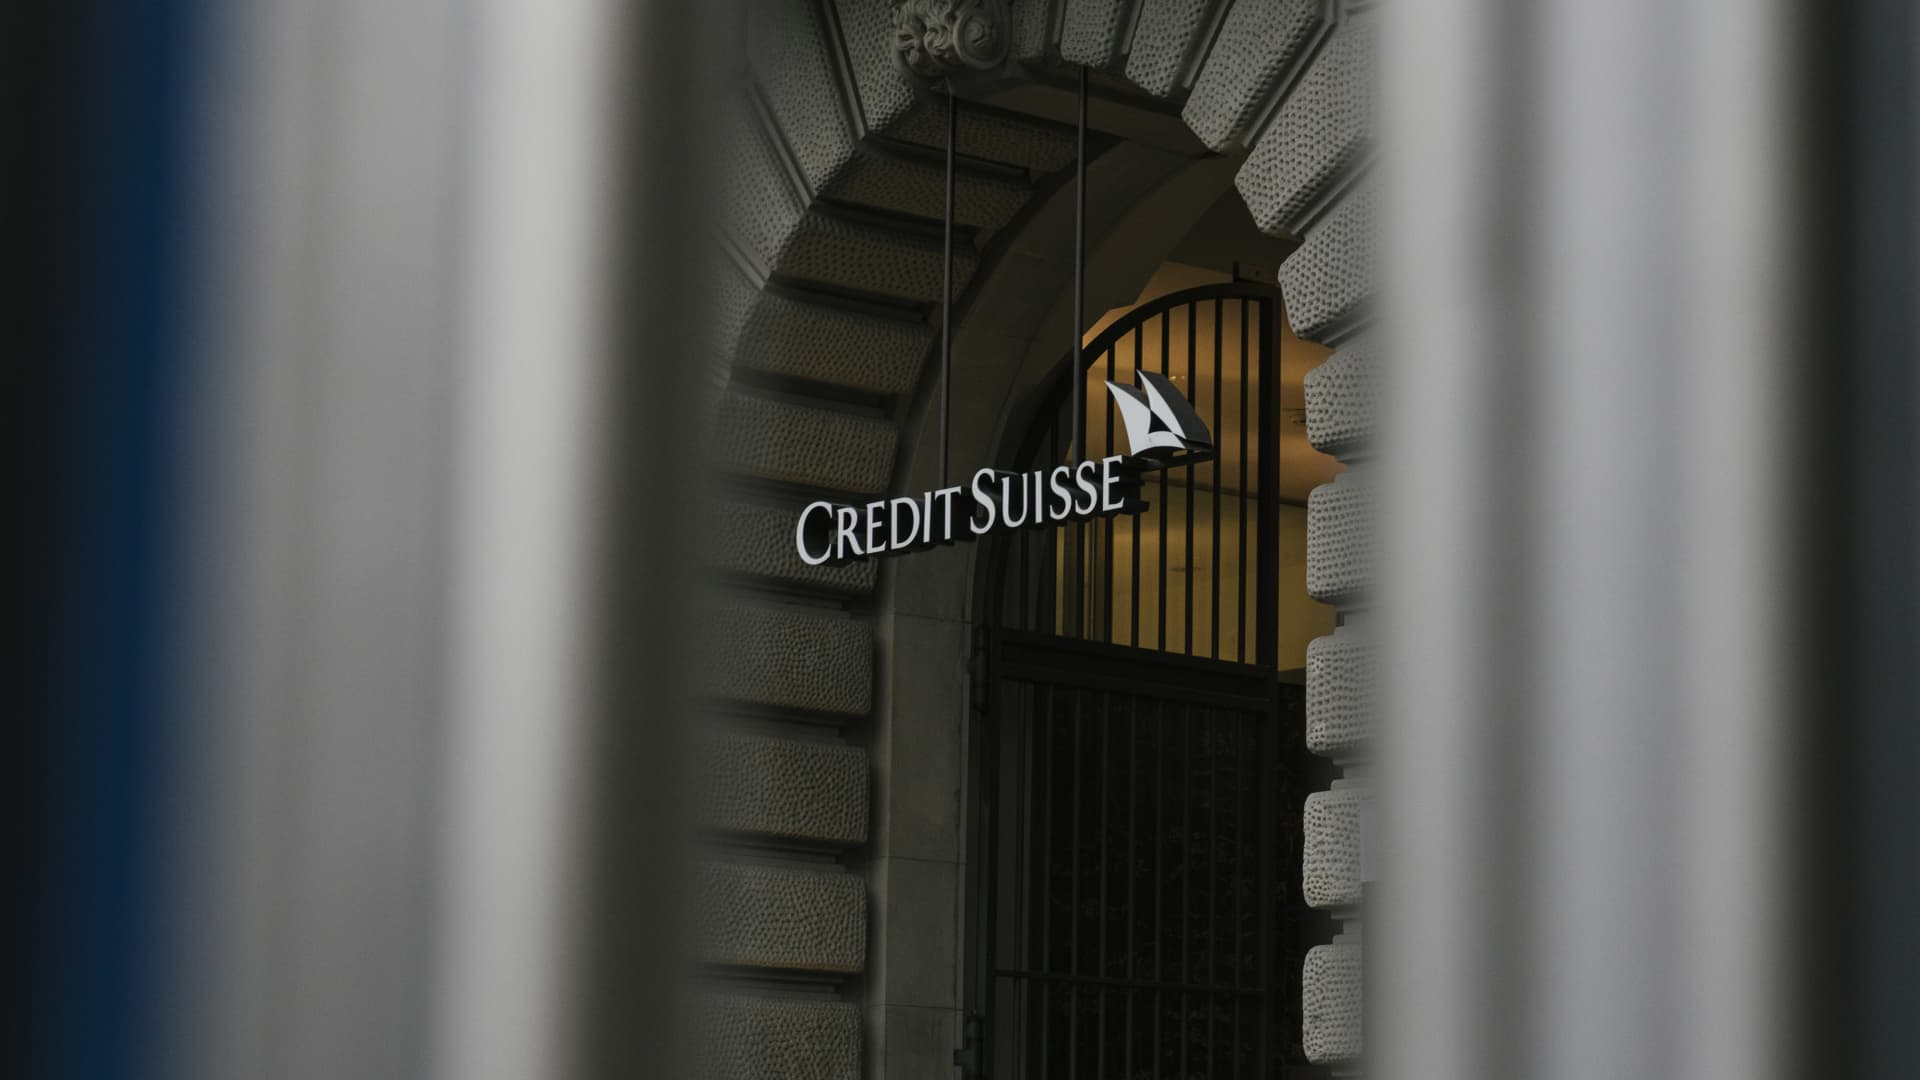 Credit Suisse issues earnings forecast for the second quarter